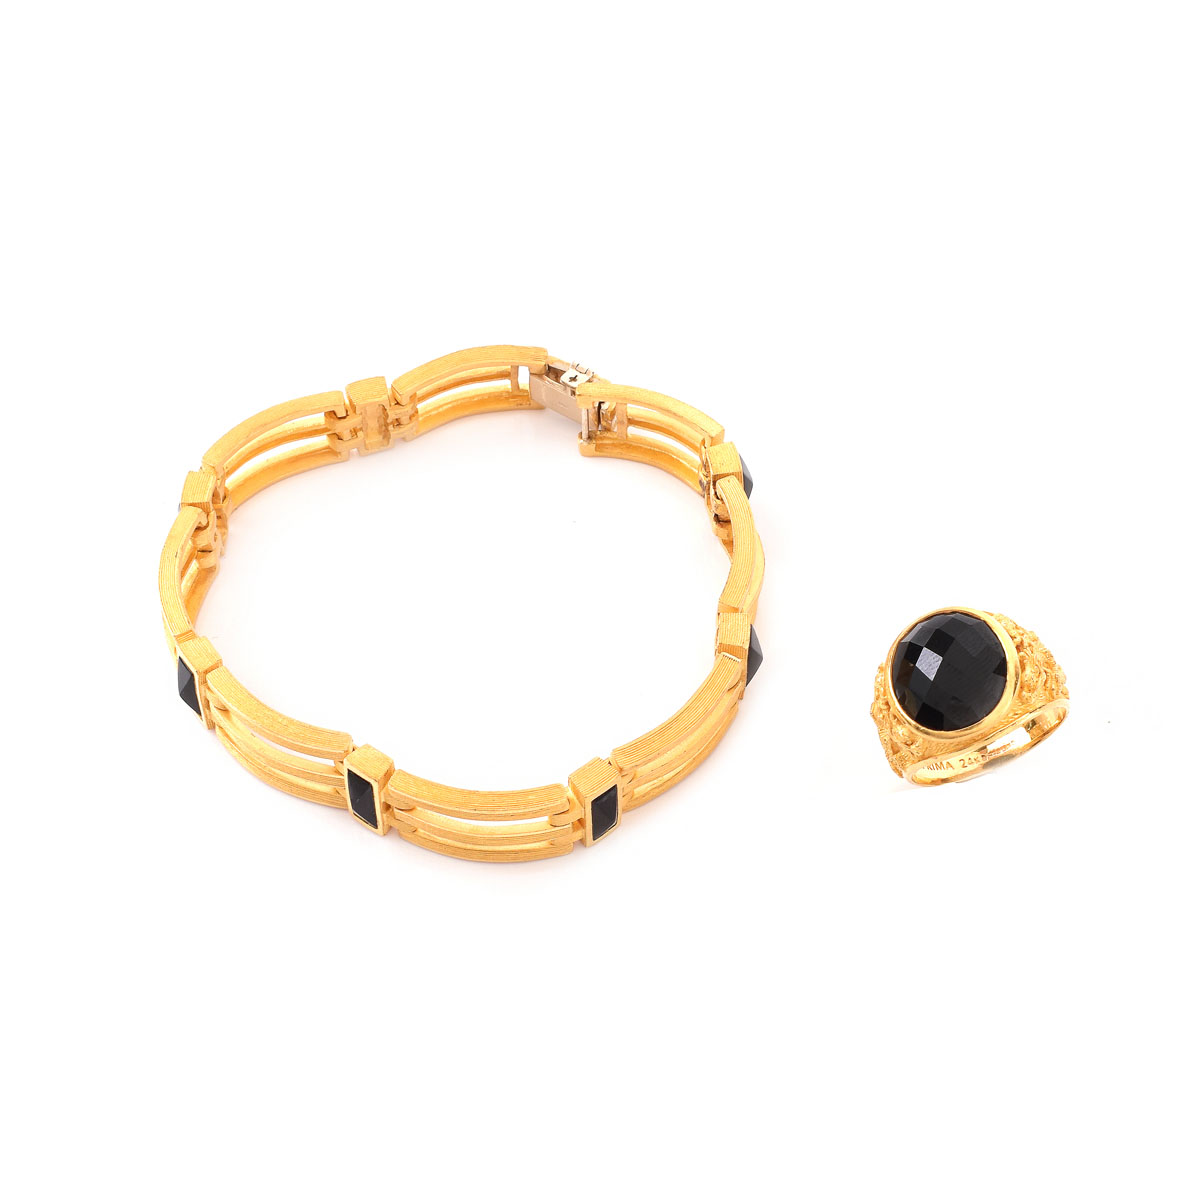 Man's Vintage Prima Criss Cross Cut Black Diamond and 24 Karat Yellow Gold Ring together with Prima 18 Karat Yellow Gold and Black Onyx Bracelet. Signed.